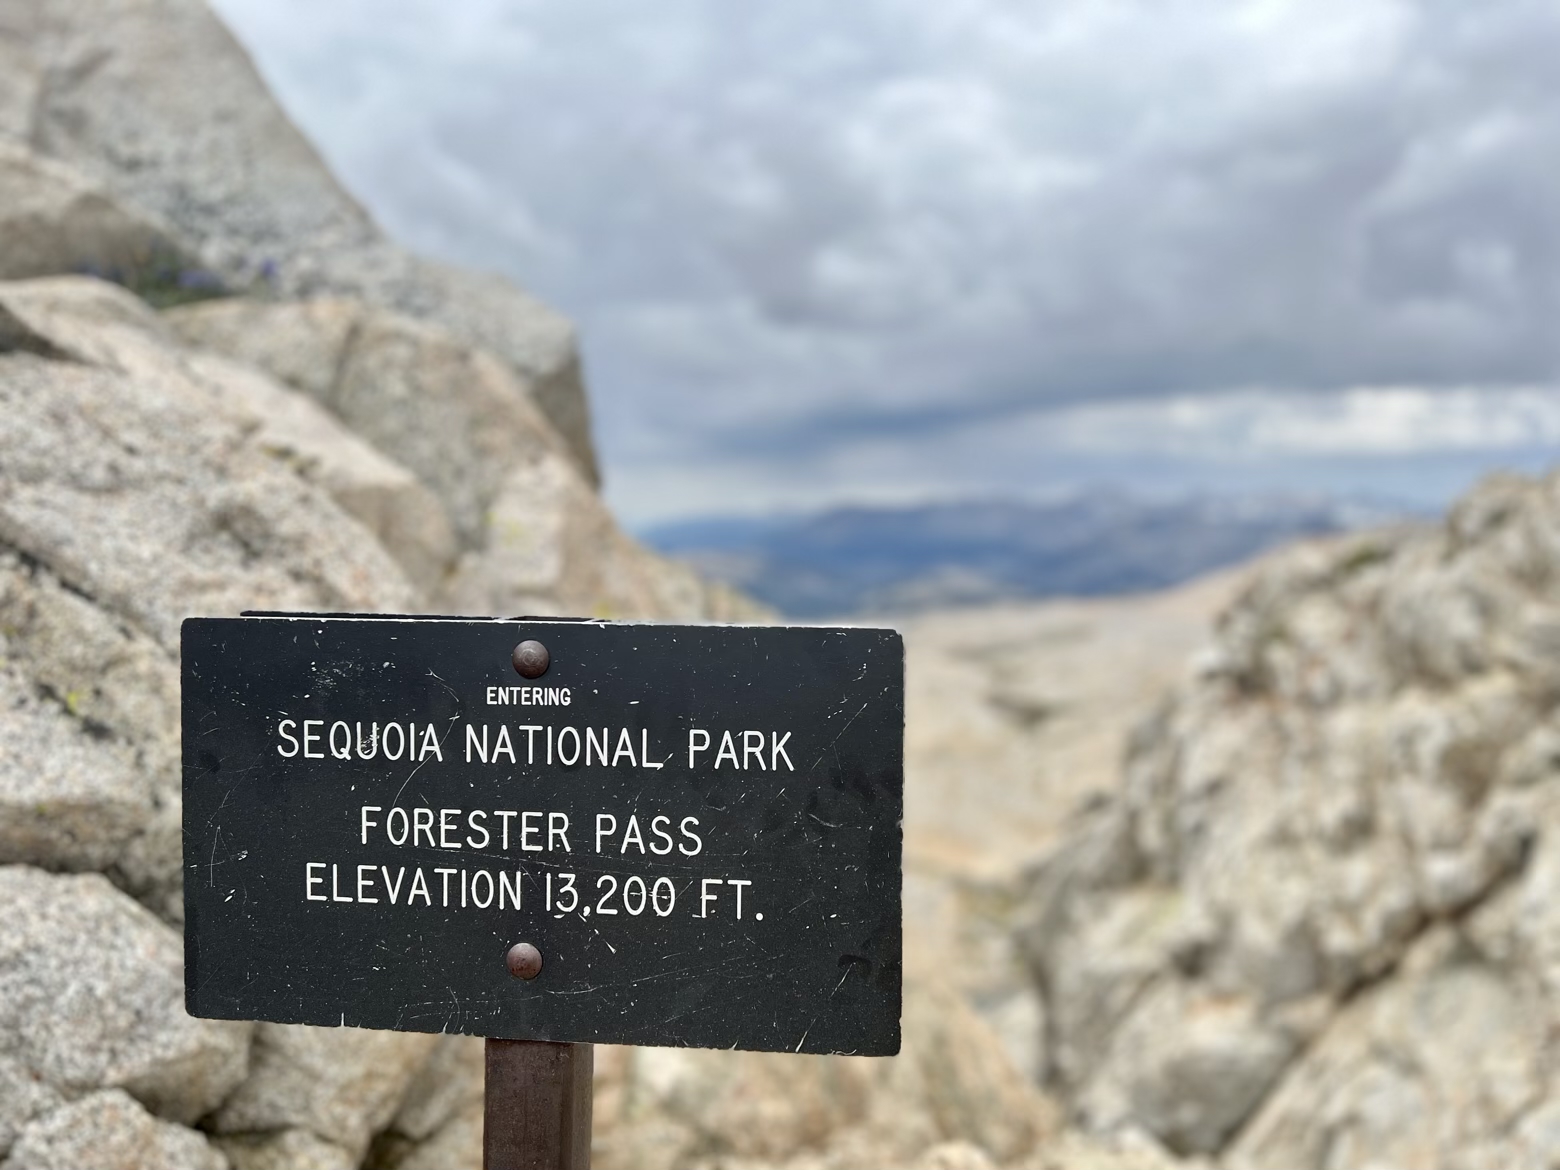 Forester Pass and the boundary of Sequoia National Park